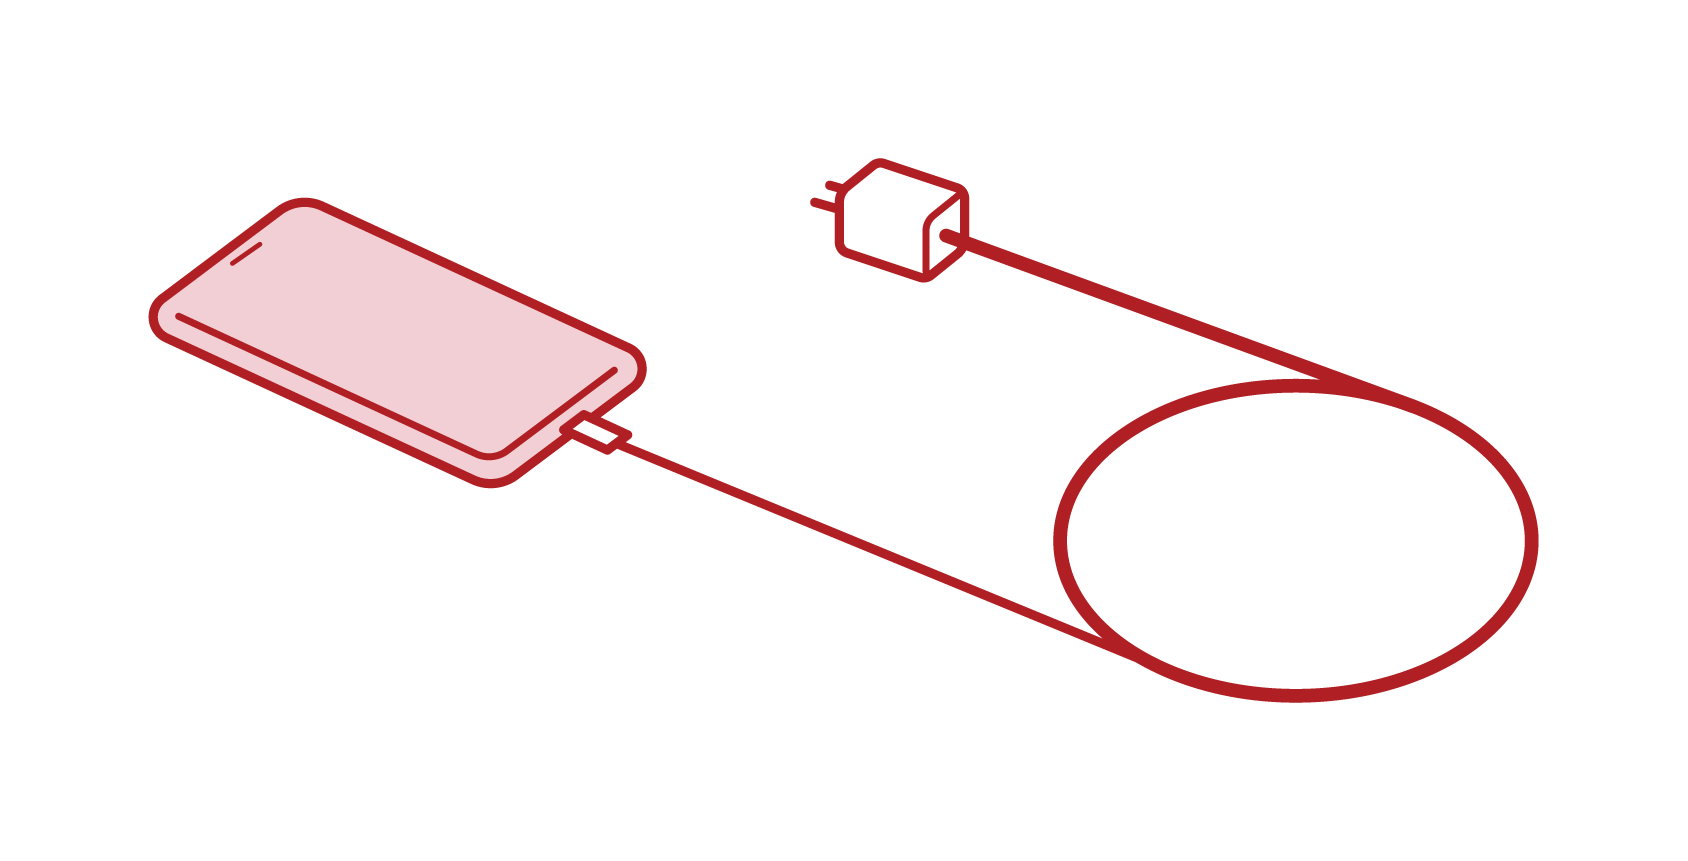 Illustration of smartphone and charging cable